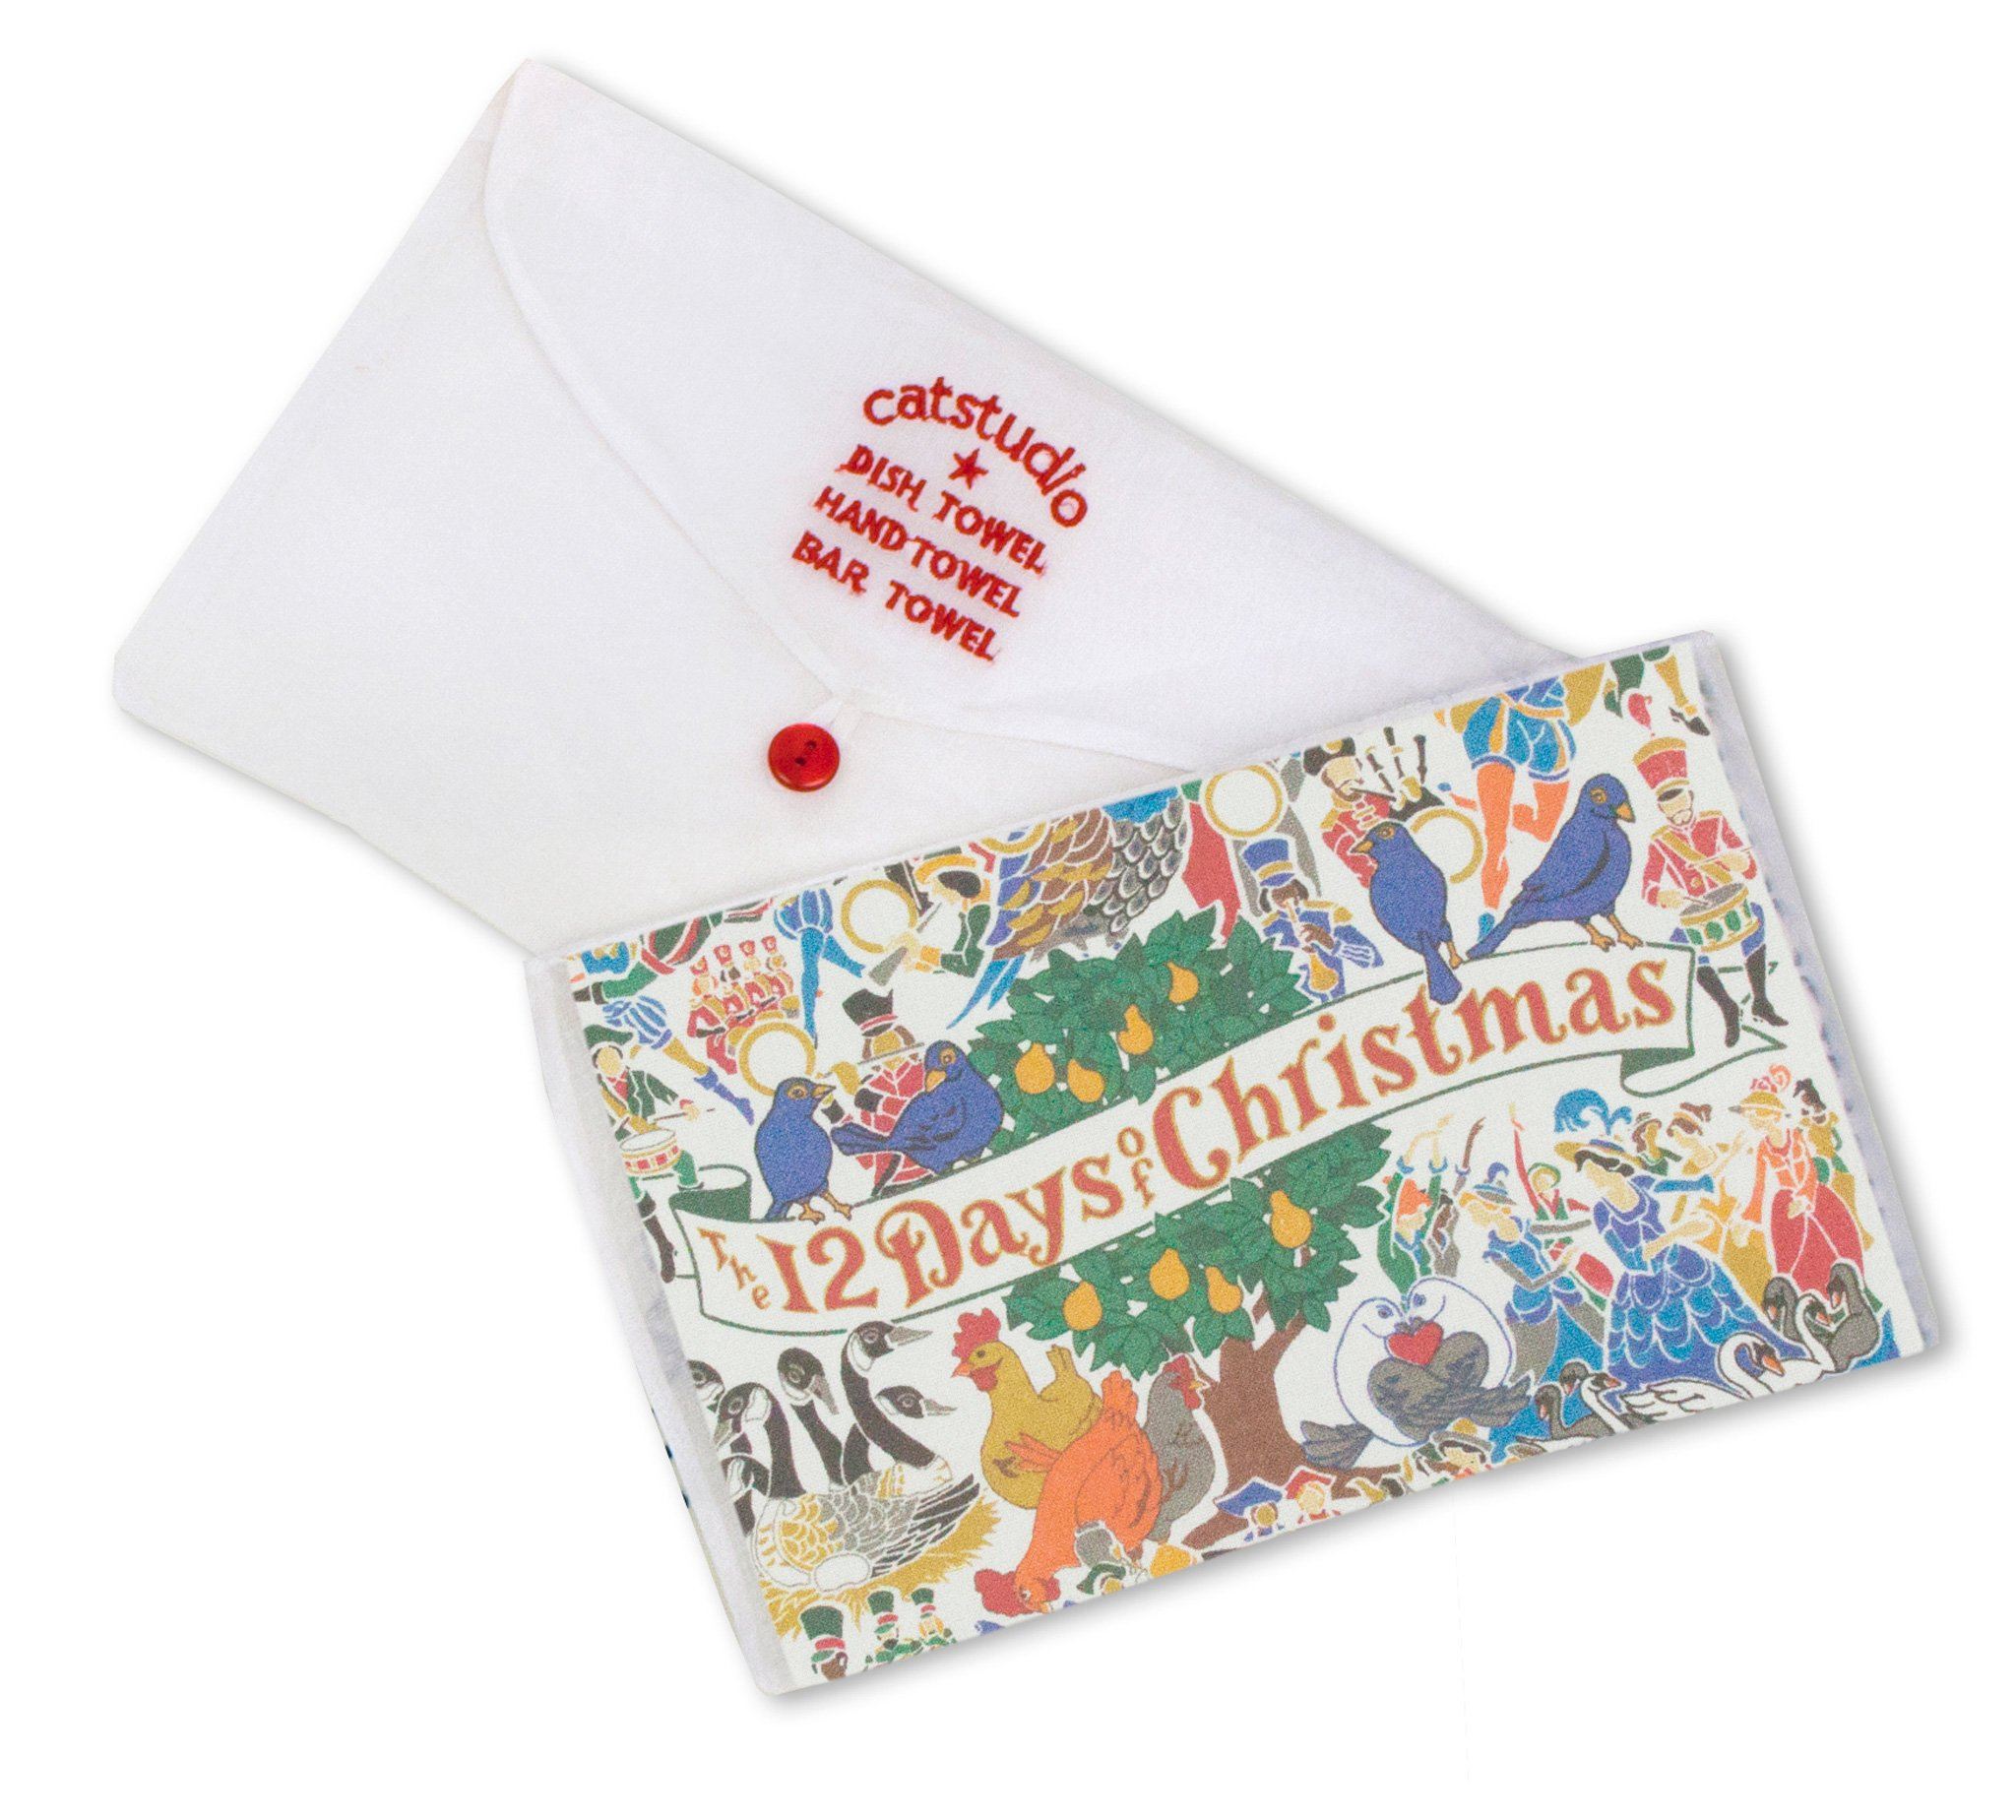 12 Days of Christmas Dish Towel  Holiday Collection by catstudio –  catstudio